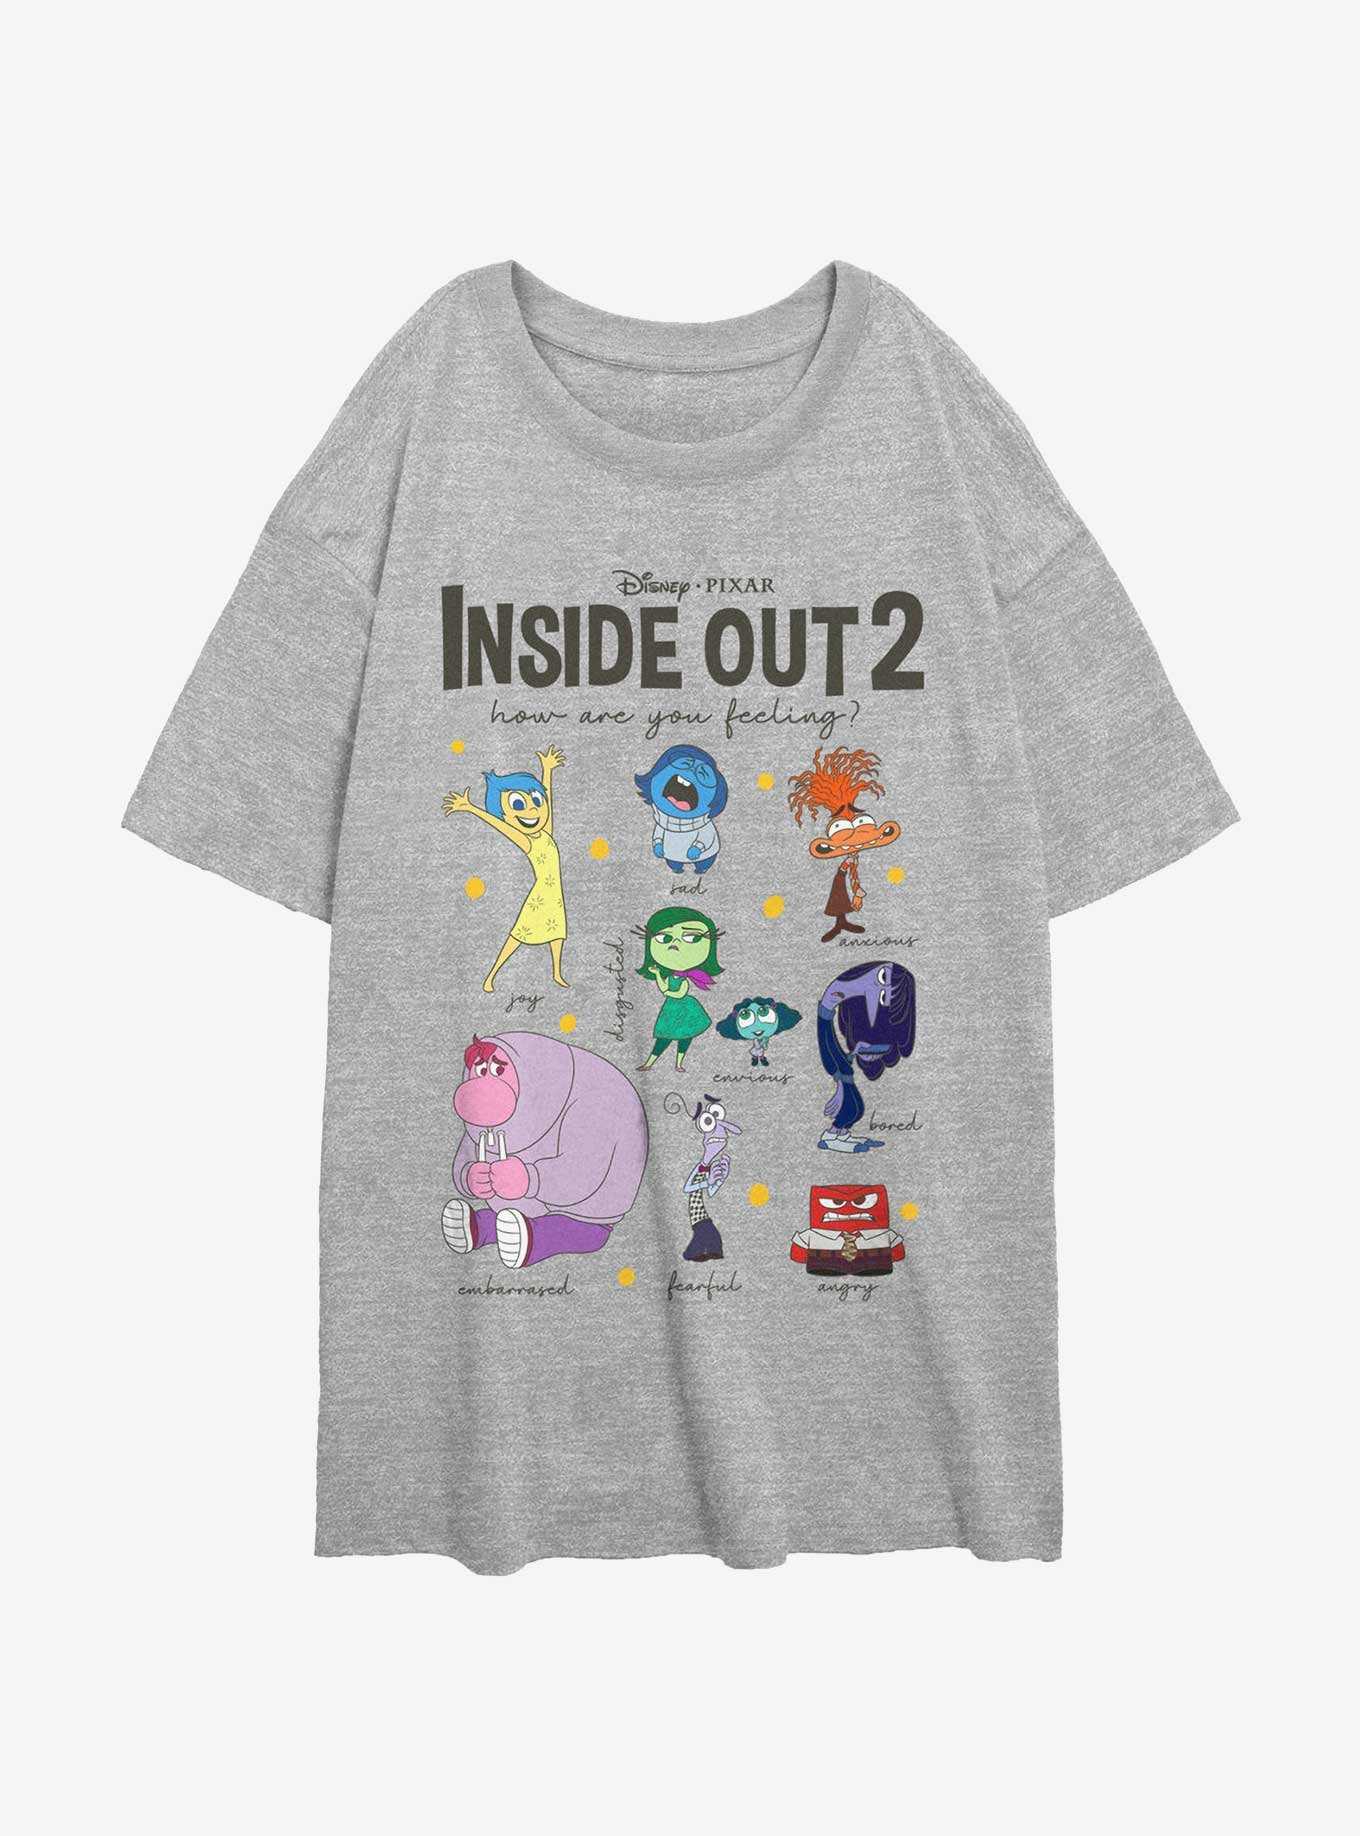 Disney Pixar Inside Out 2 Textbook Of Emotions Womens Oversized T-Shirt, , hi-res